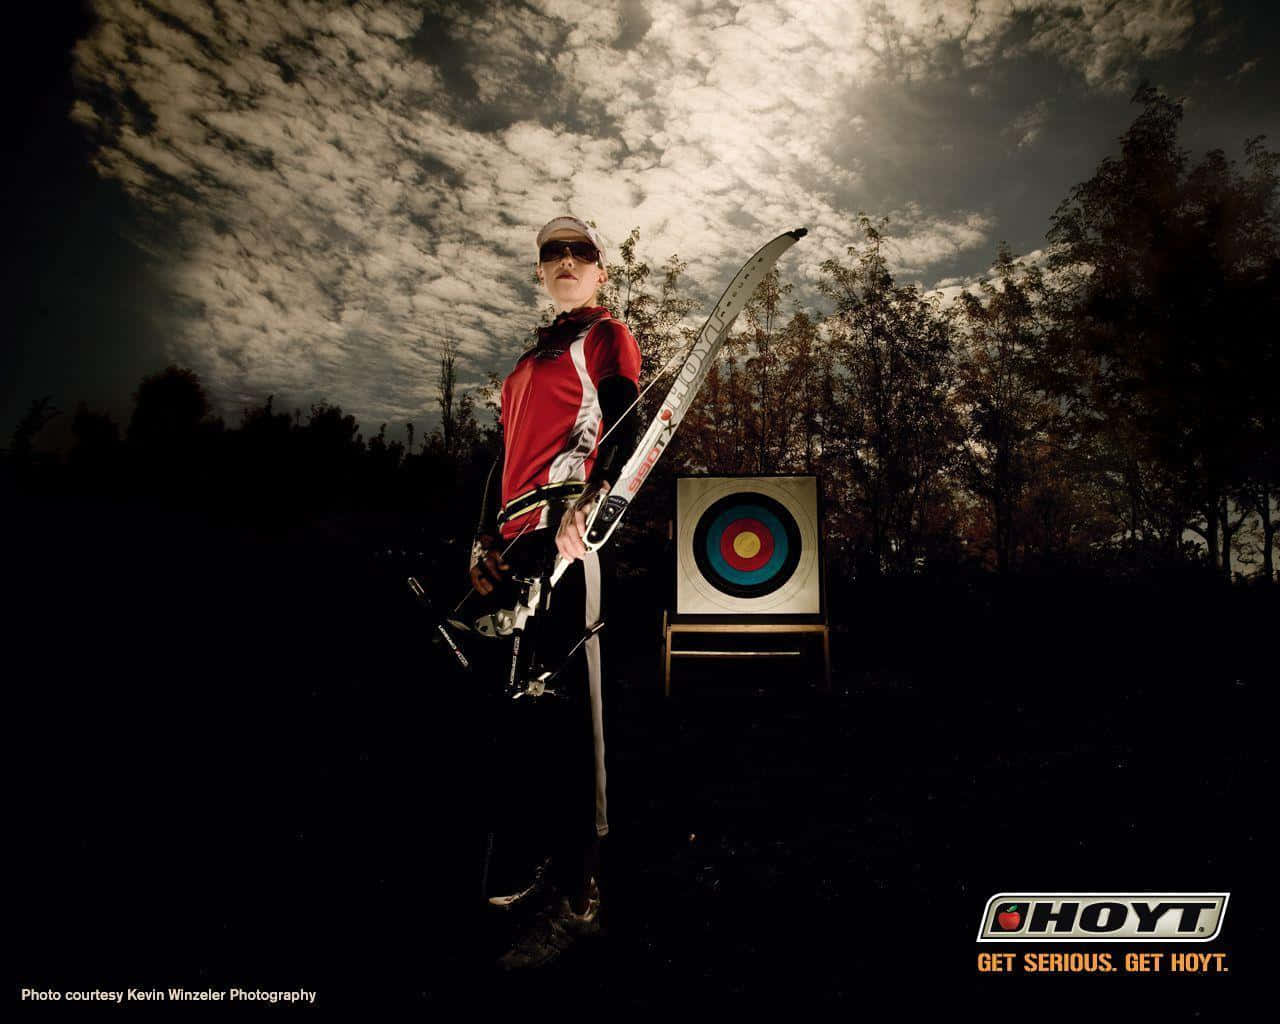 An Archery Range is the Perfect Place for Adventure Seekers